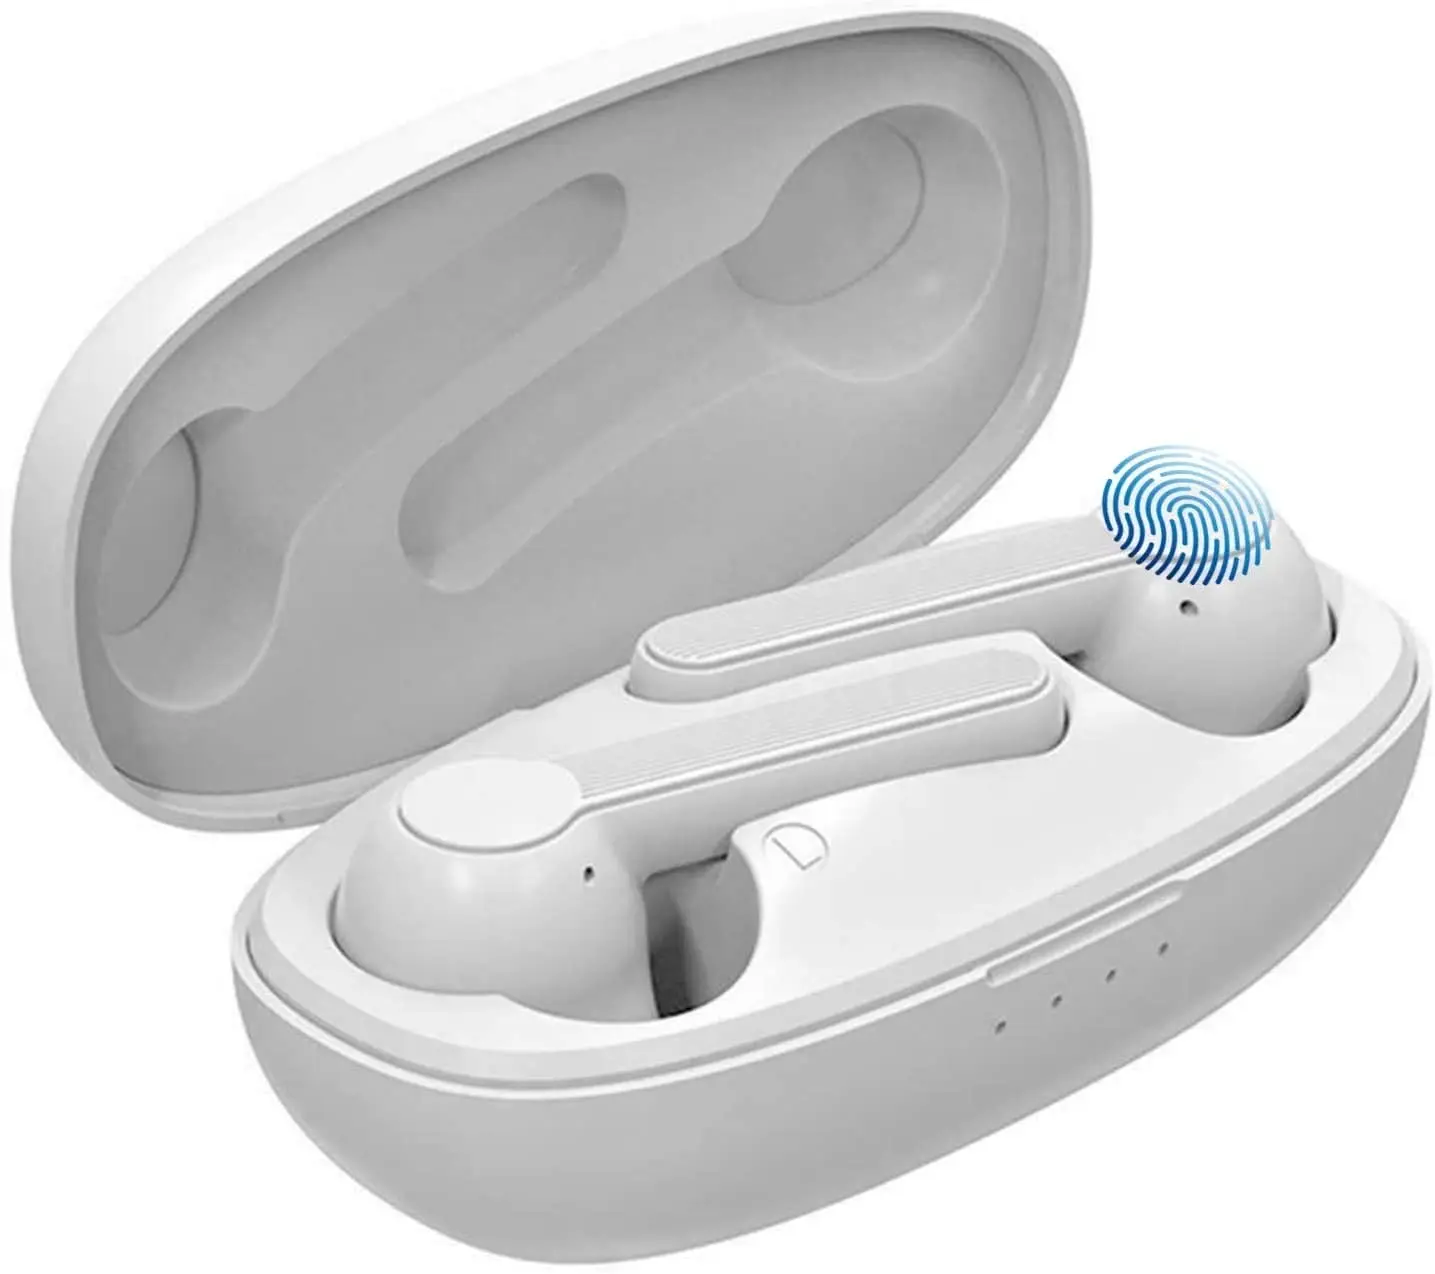 

SKJ private patent design hot sales XY7 XY8 XY20 XY30 XY50 earbuds tws wireless bluetooth earphone OEM factory with CE ROHS FCC, White/black/blue